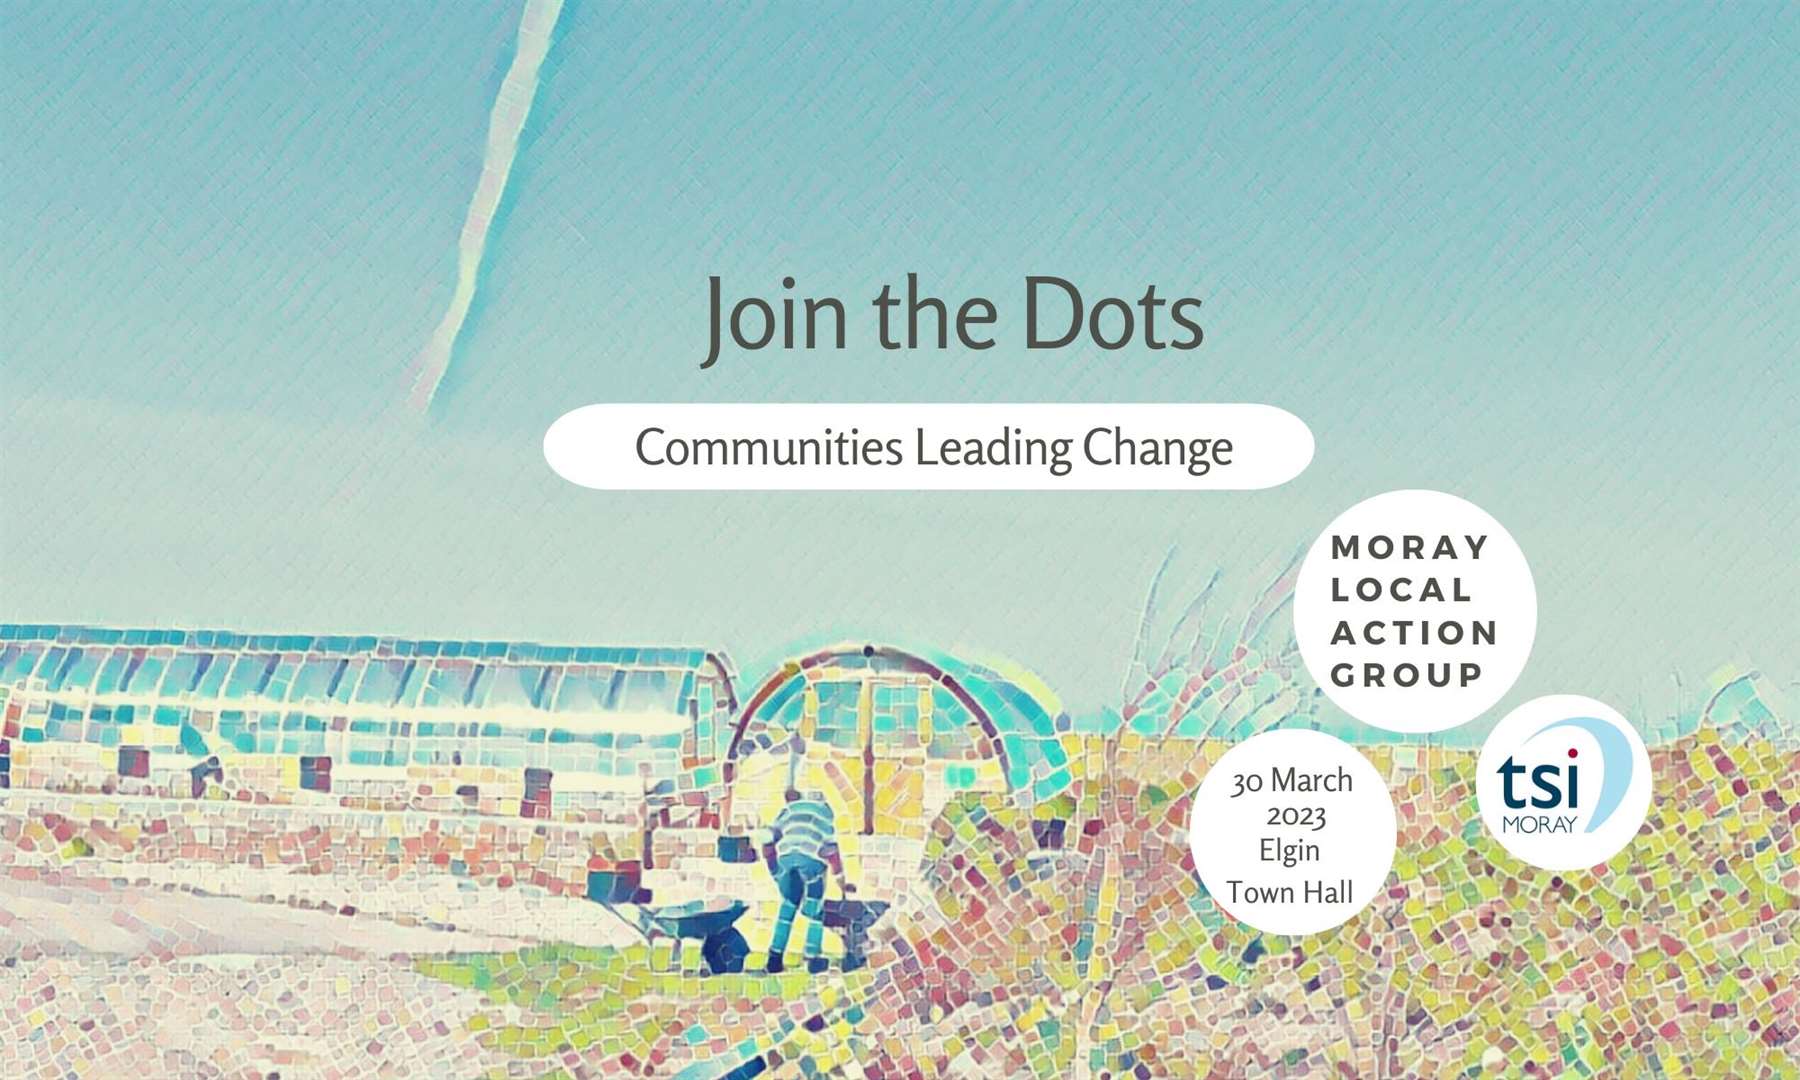 Communities leading change is the theme of this year's Join the Dots.